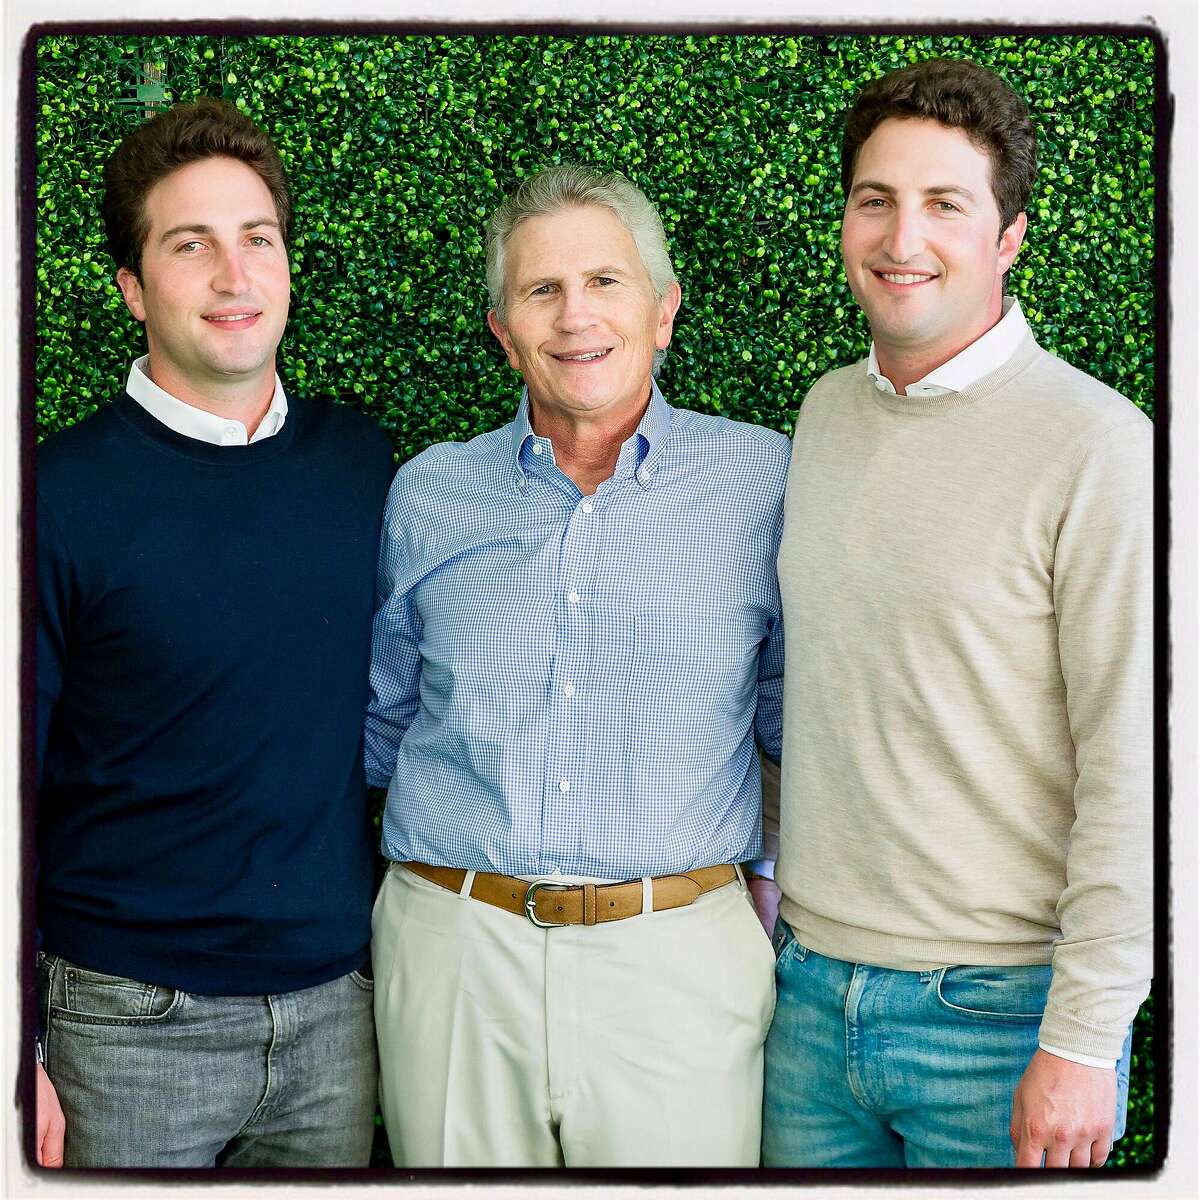 Stern Grove Festival board chairman Matthew Goldman (left) with his dad, outgoing chairman Doug Goldman and brother, festival treasurer Jason Goldman at The Big Picnic fundraiser. August 18, 2019.